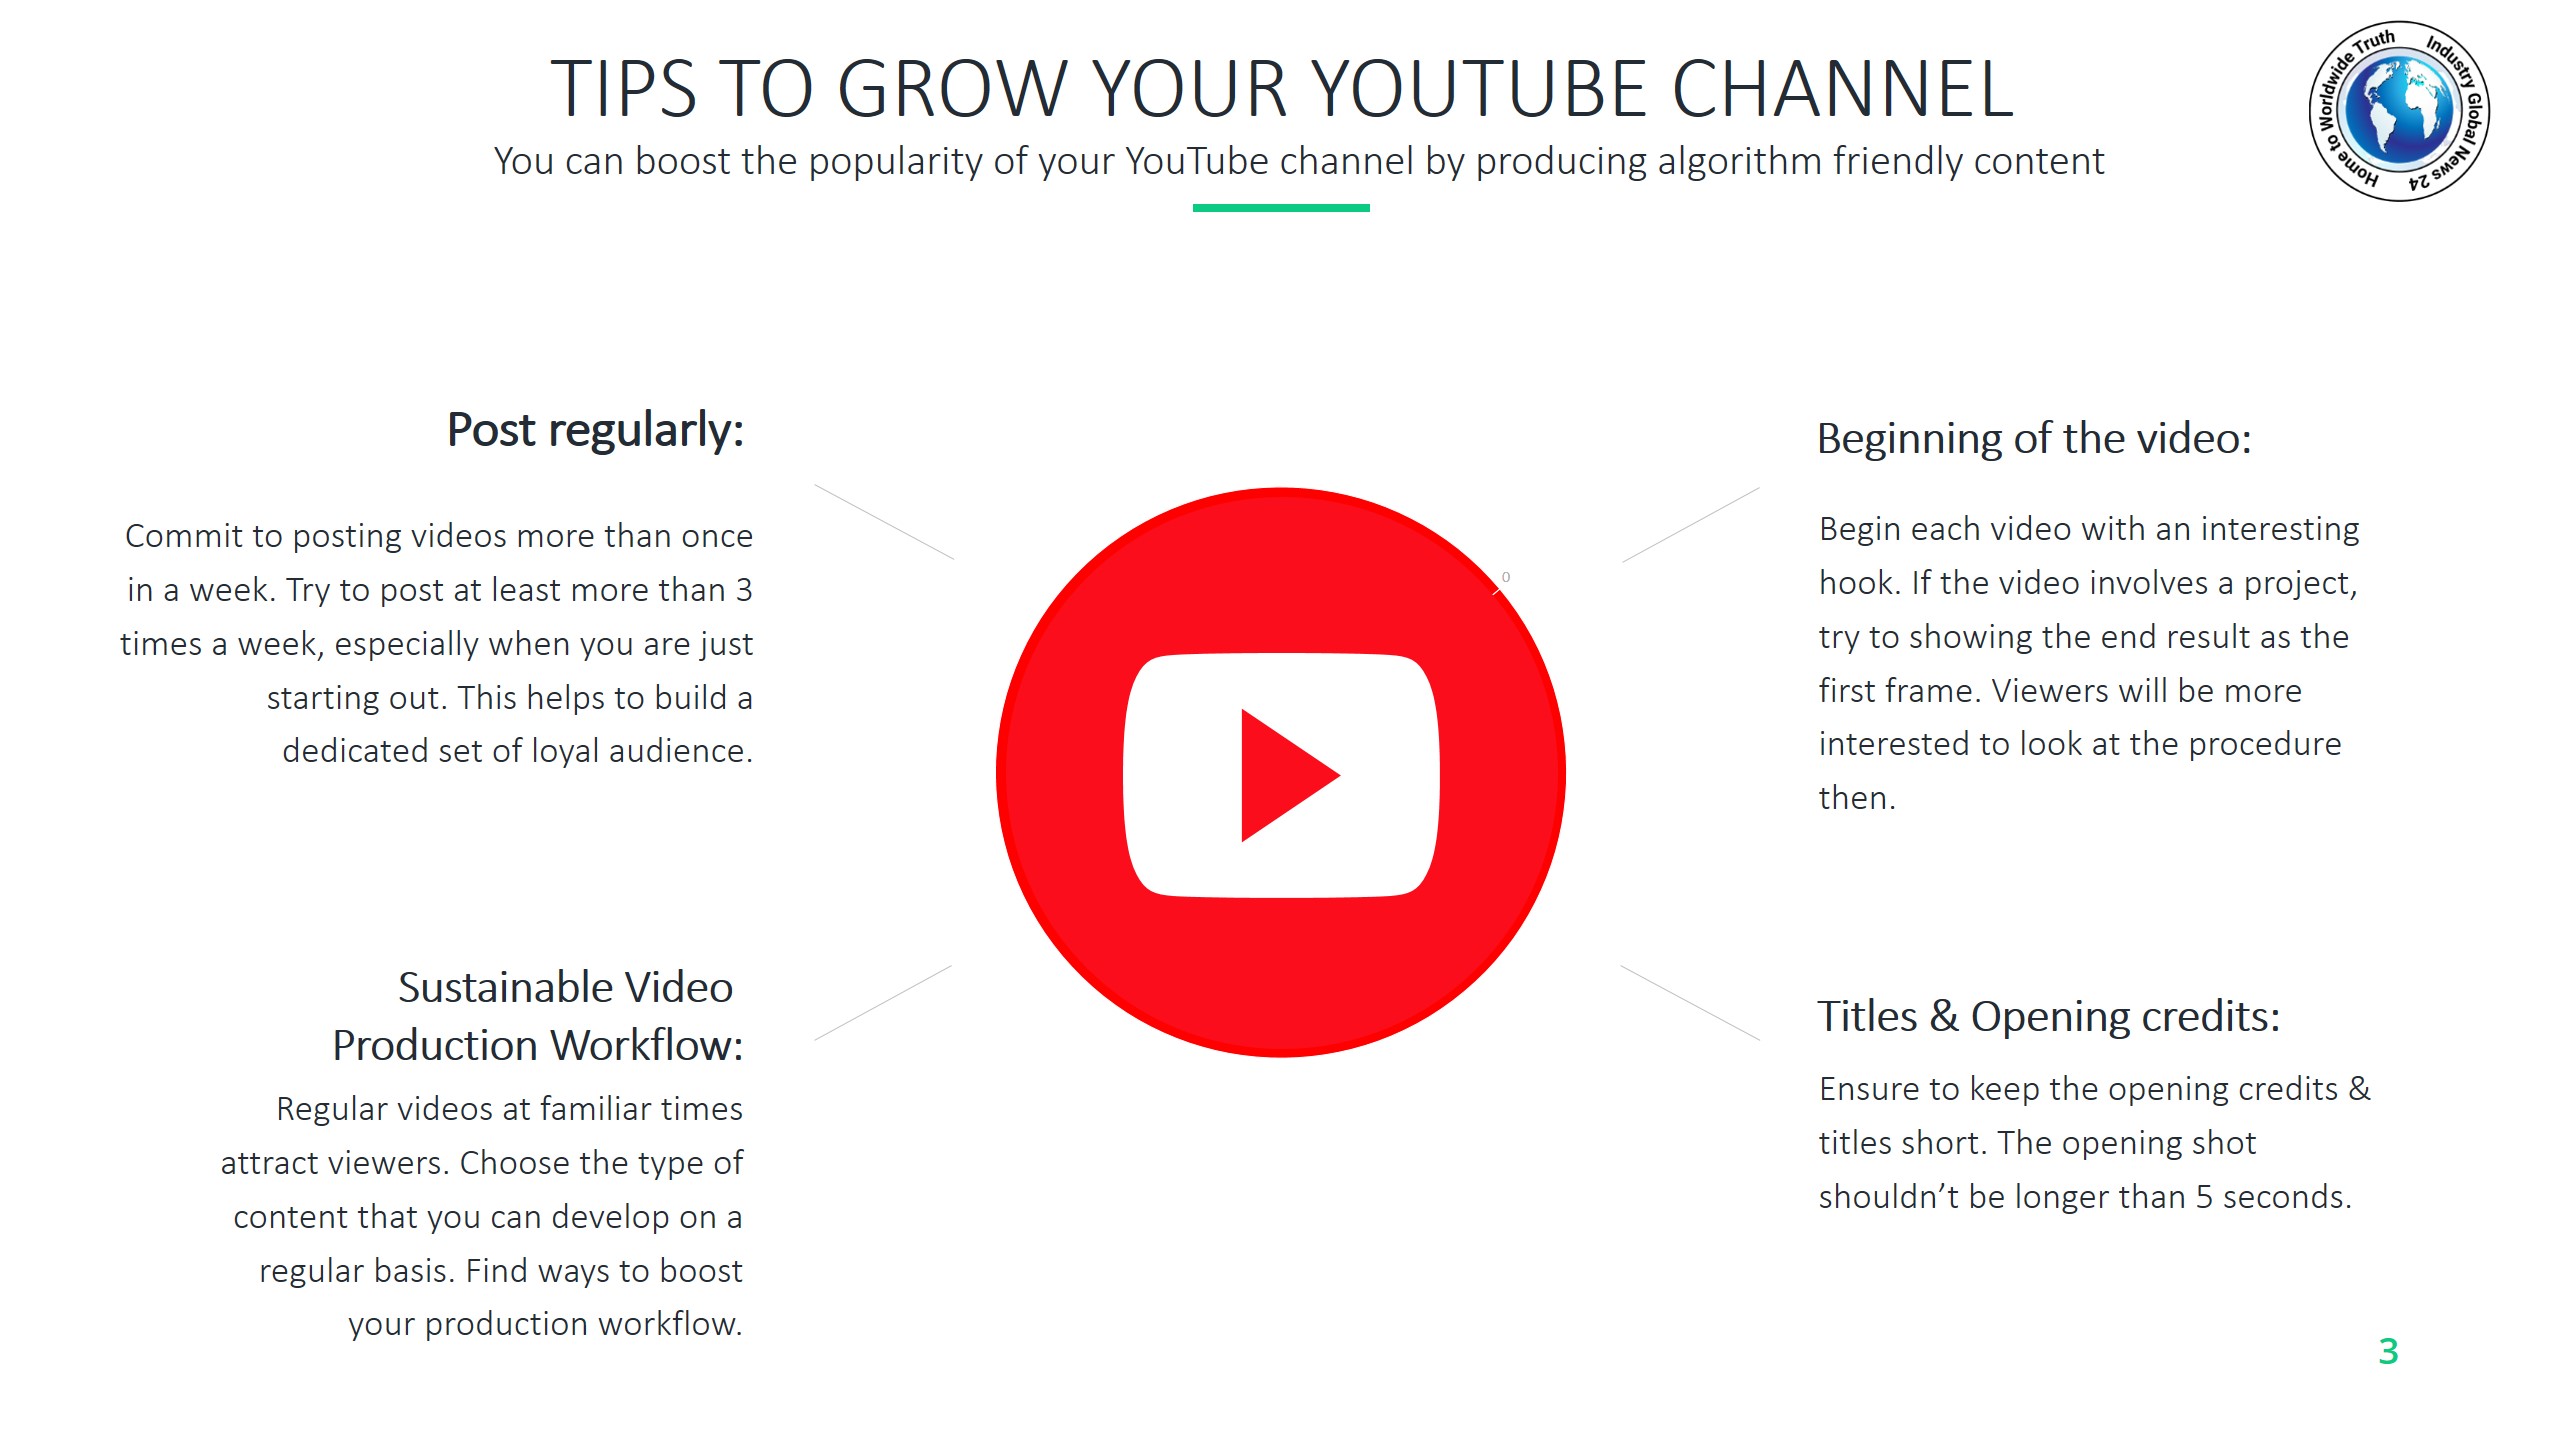 Tips to grow your YouTube channel